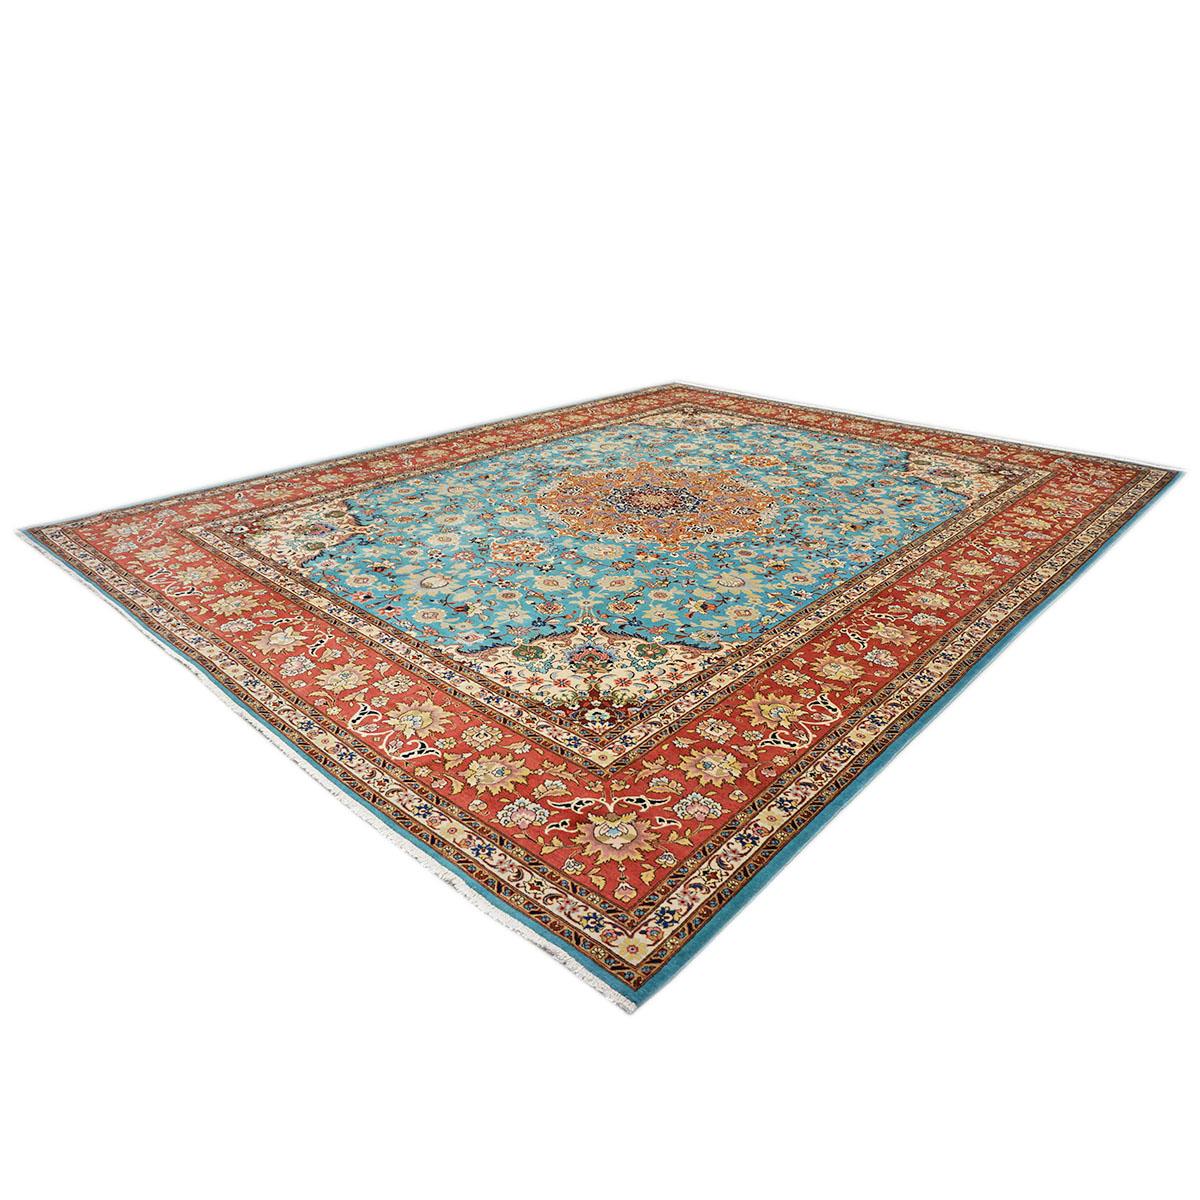 Mid-20th Century Antique Persian Tabriz Emad 9x12 Light Blue, Red, & Ivory Handmade Area Rug For Sale